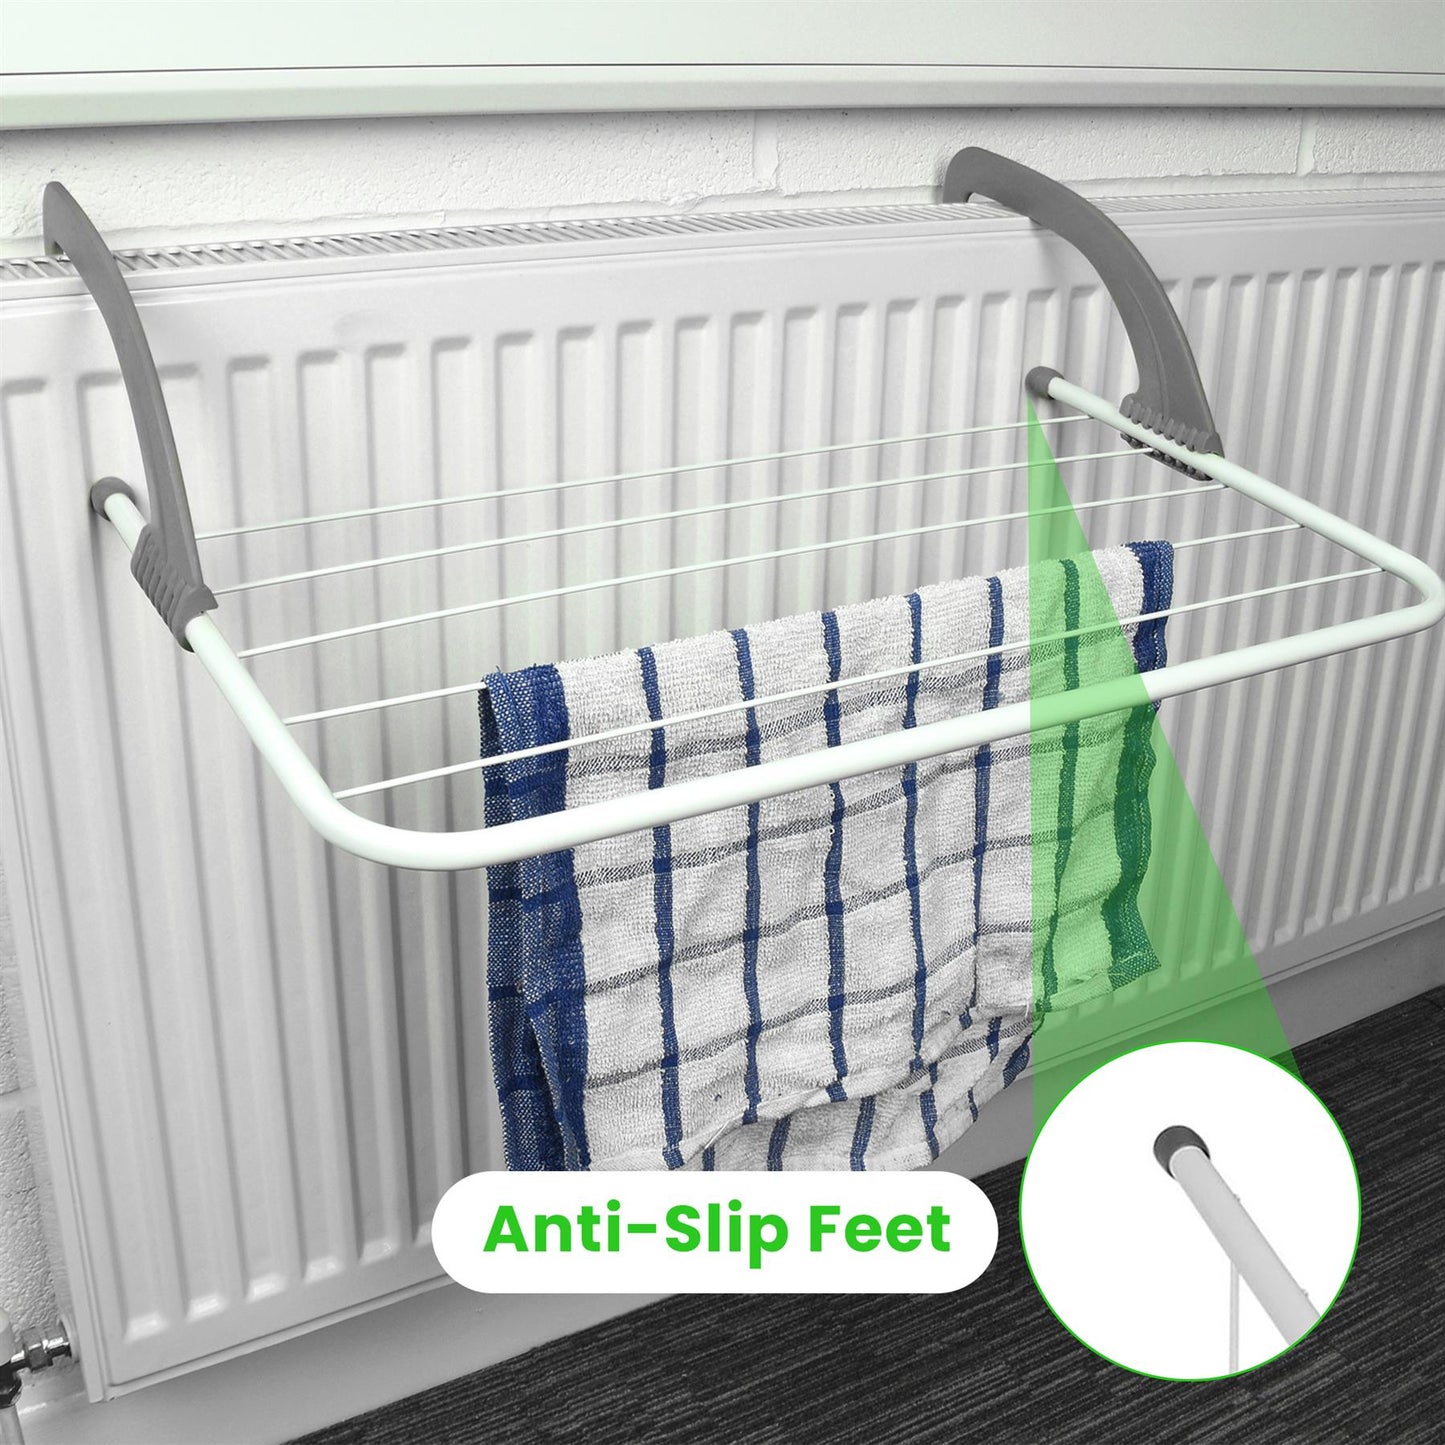 Over Radiator Clothes Airer